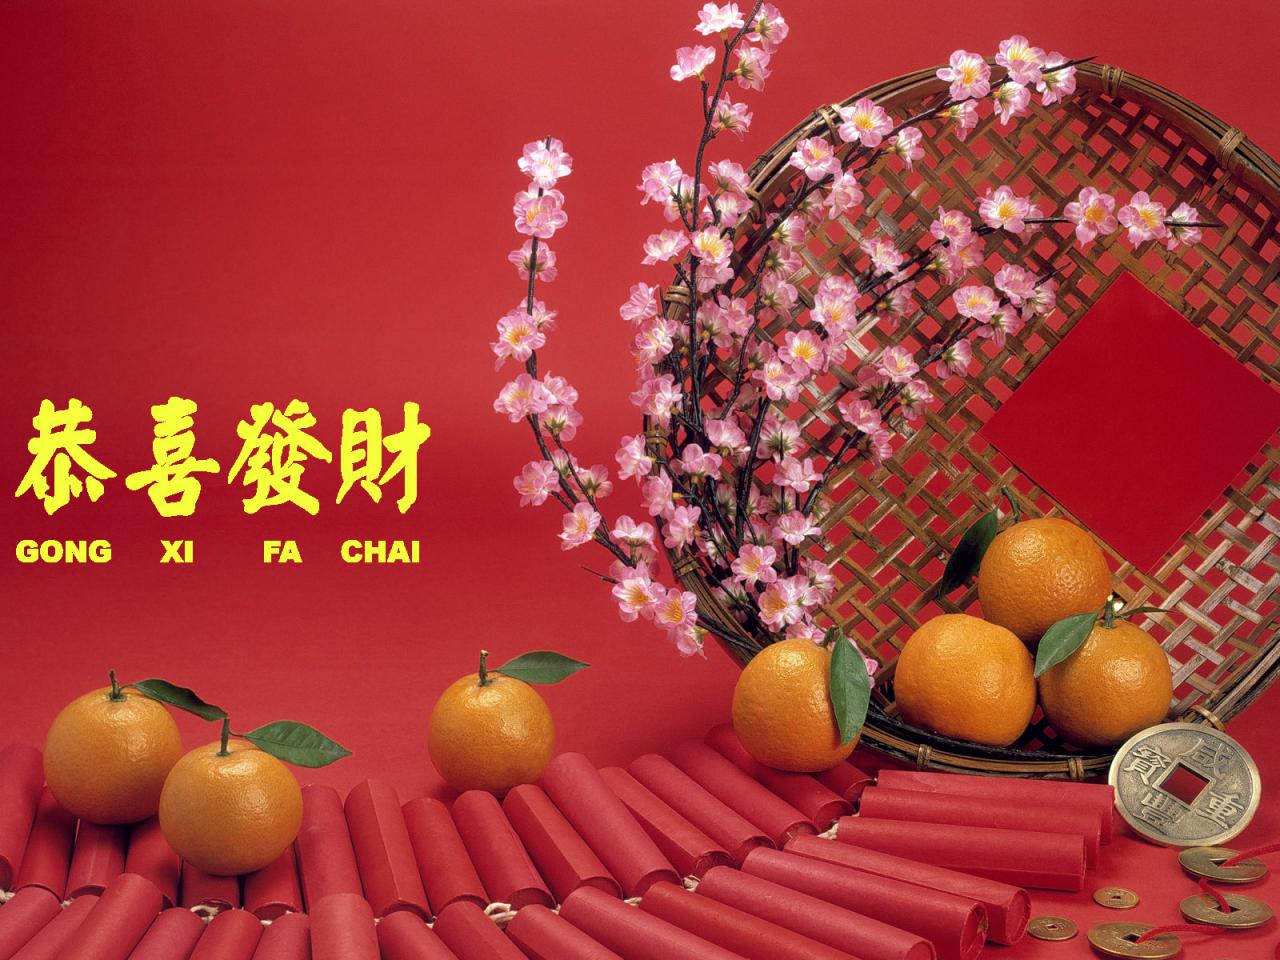  Fat Cai 2015 Wallpaper for Chinese New Year HD Wallpapers for Free